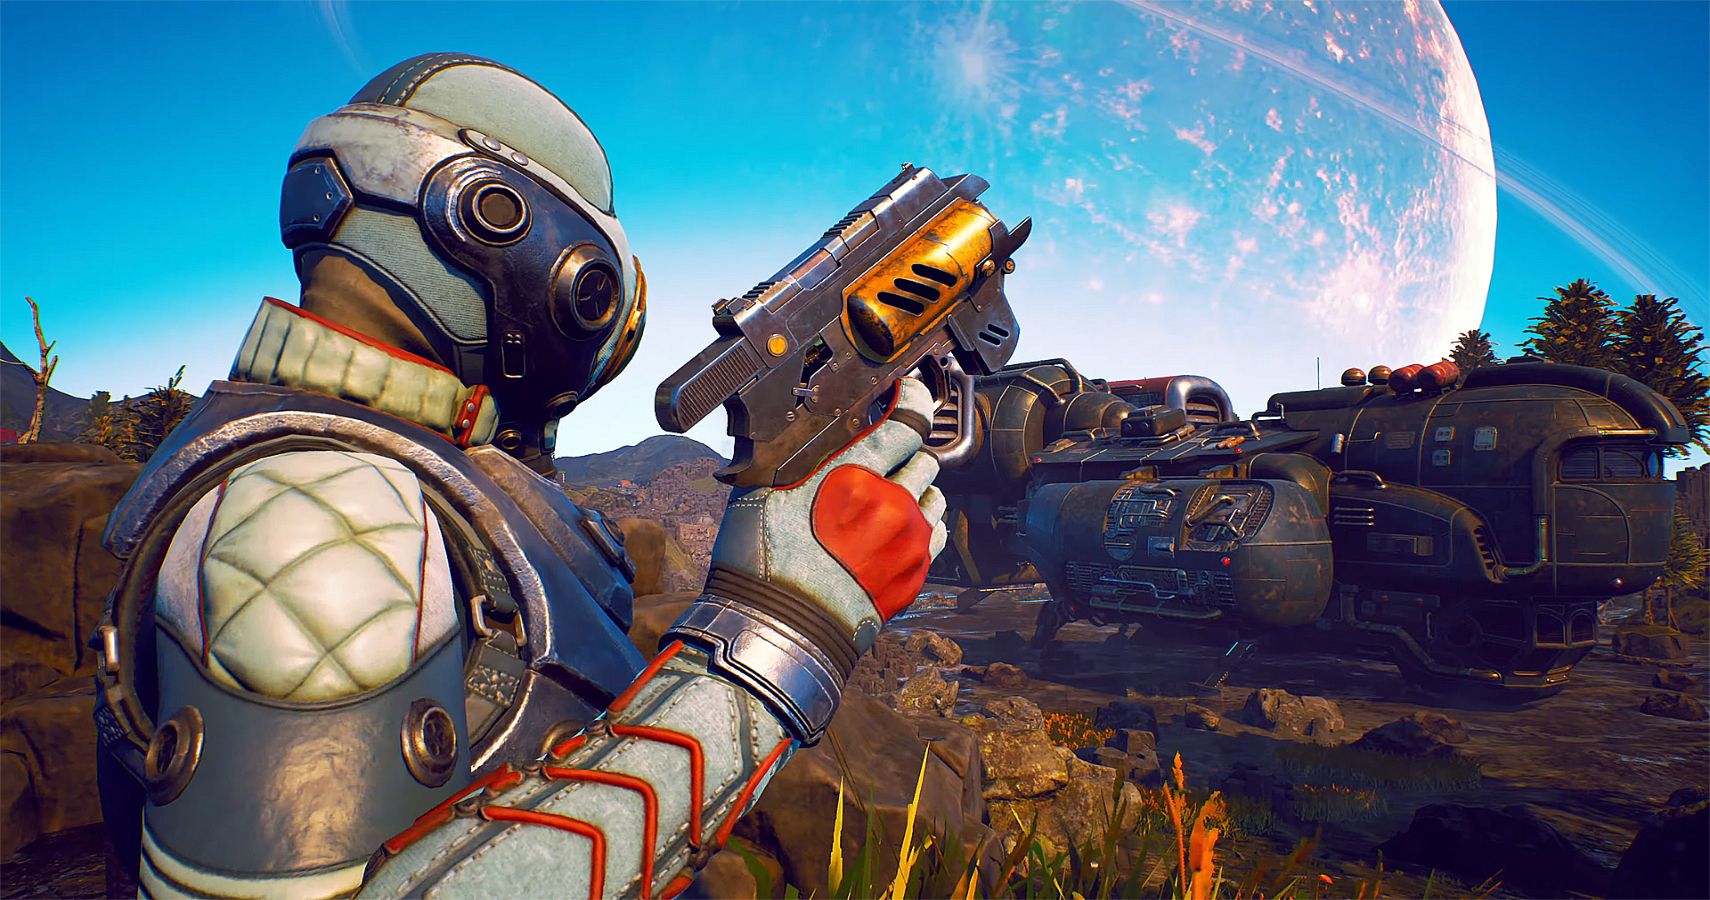 Outer Worlds review - Better than Fallout?